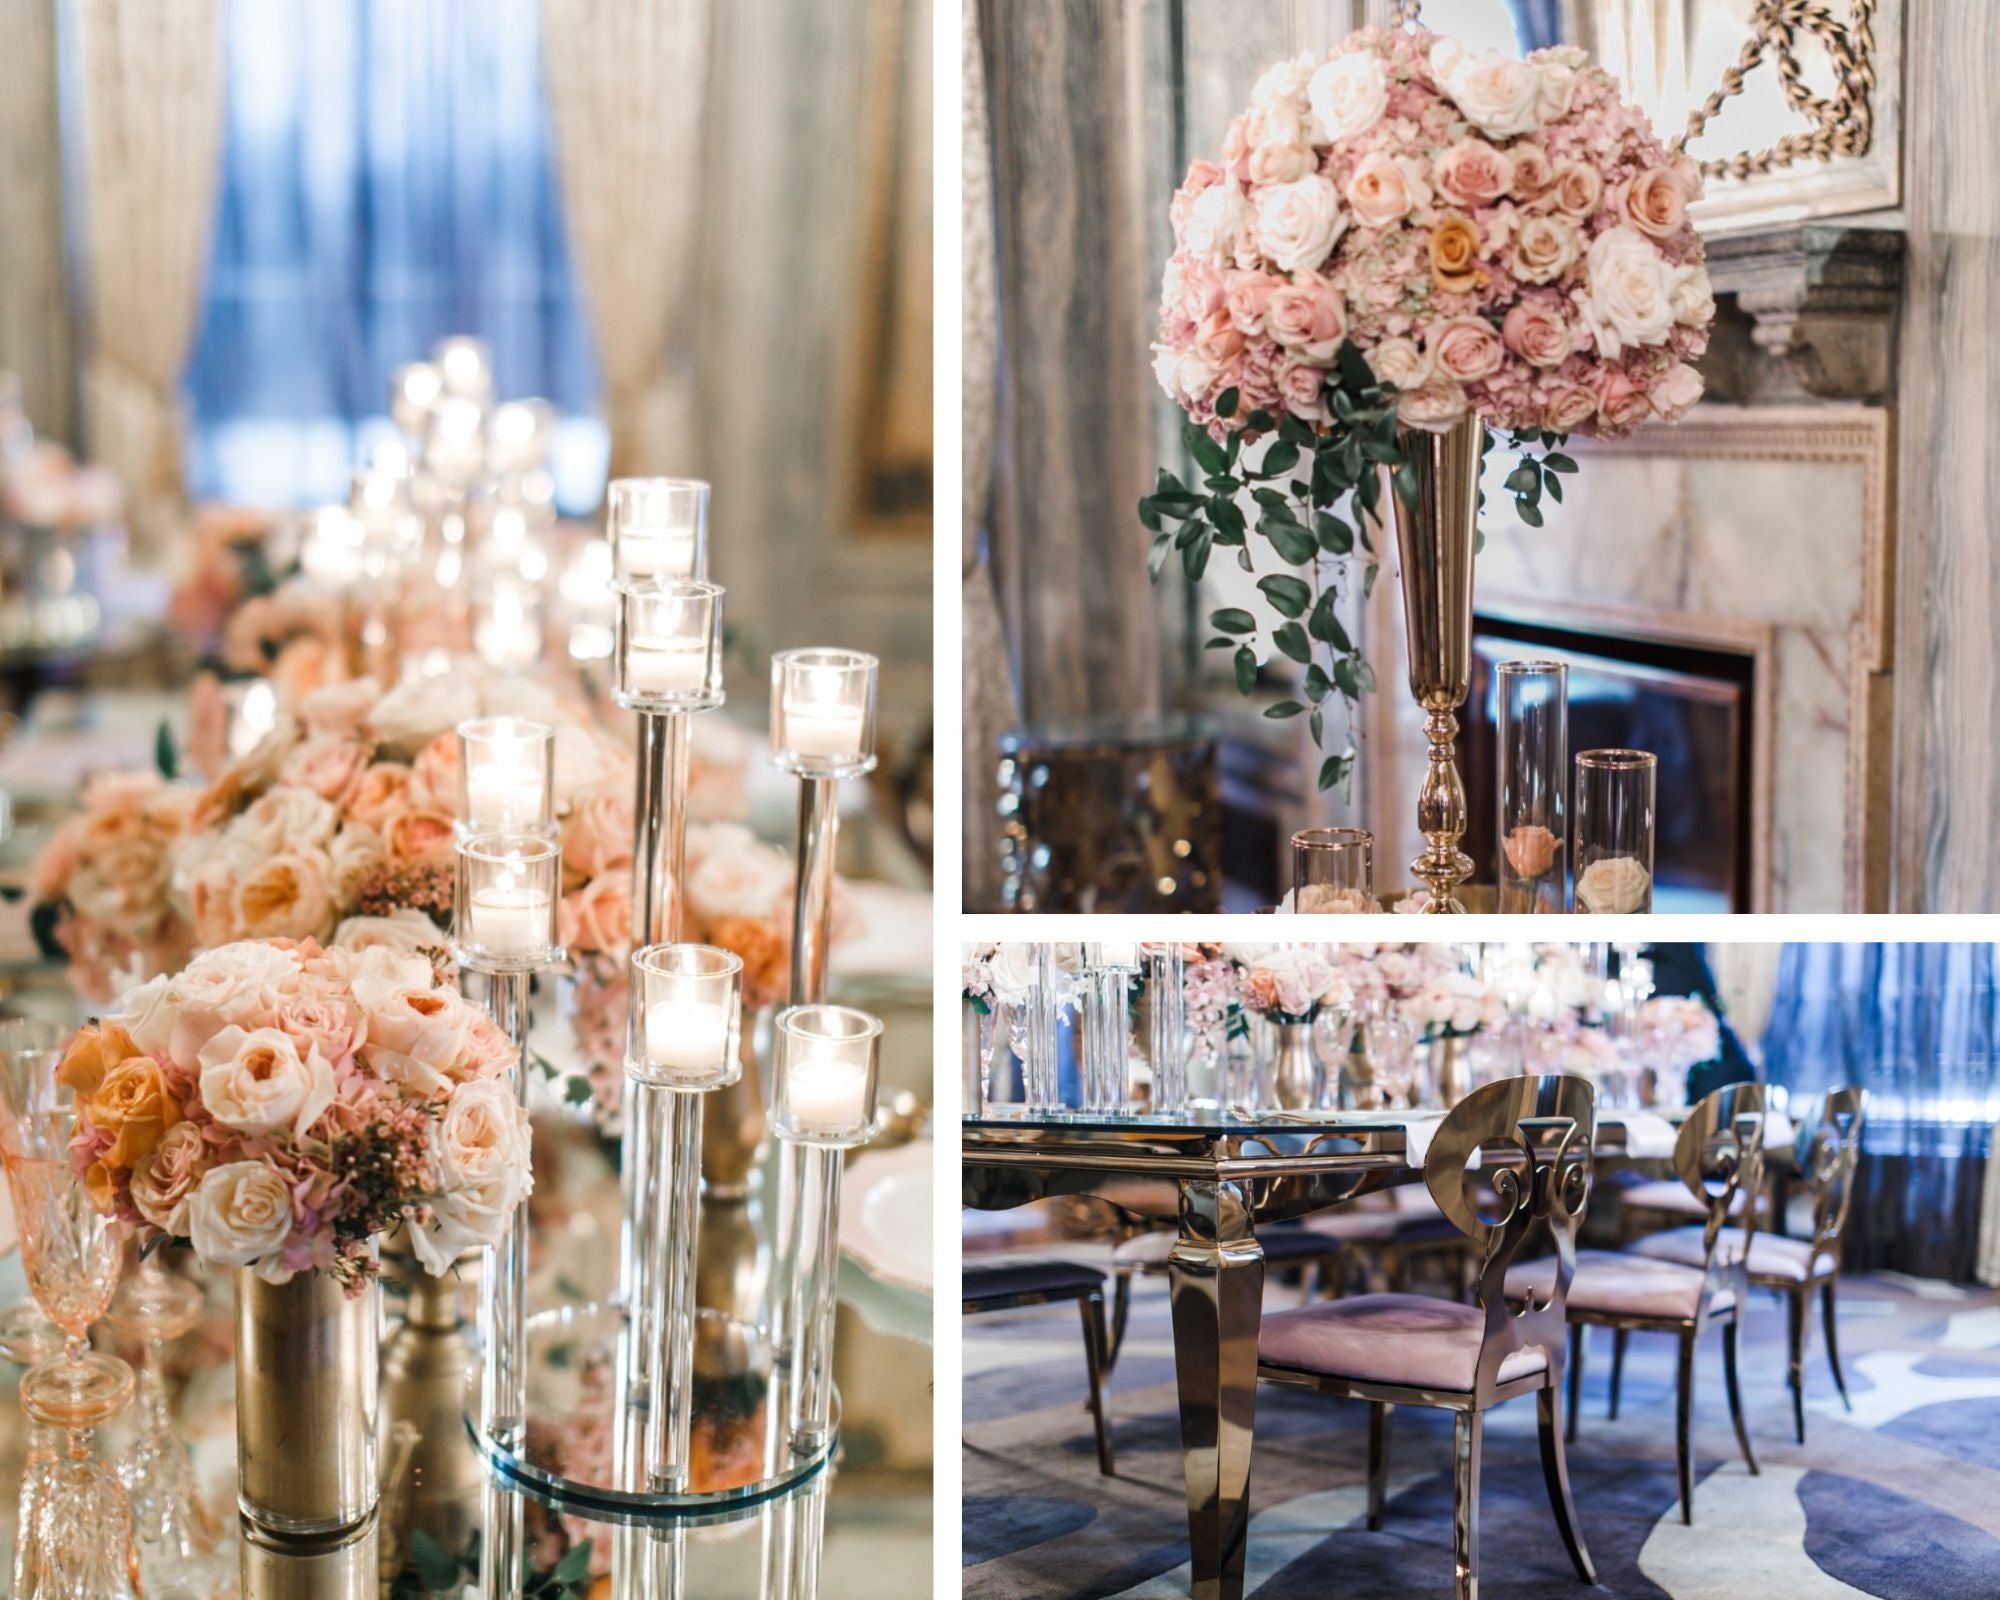 Marie Antoinette-inspired bridal style! This shoot features glam, regal wedding, and bridal style inspiration, like this lavish ballroom wedding reception. The pink and peach florals, mirrored tables, and candle light are stunning! Photography by Artvesta Studio.